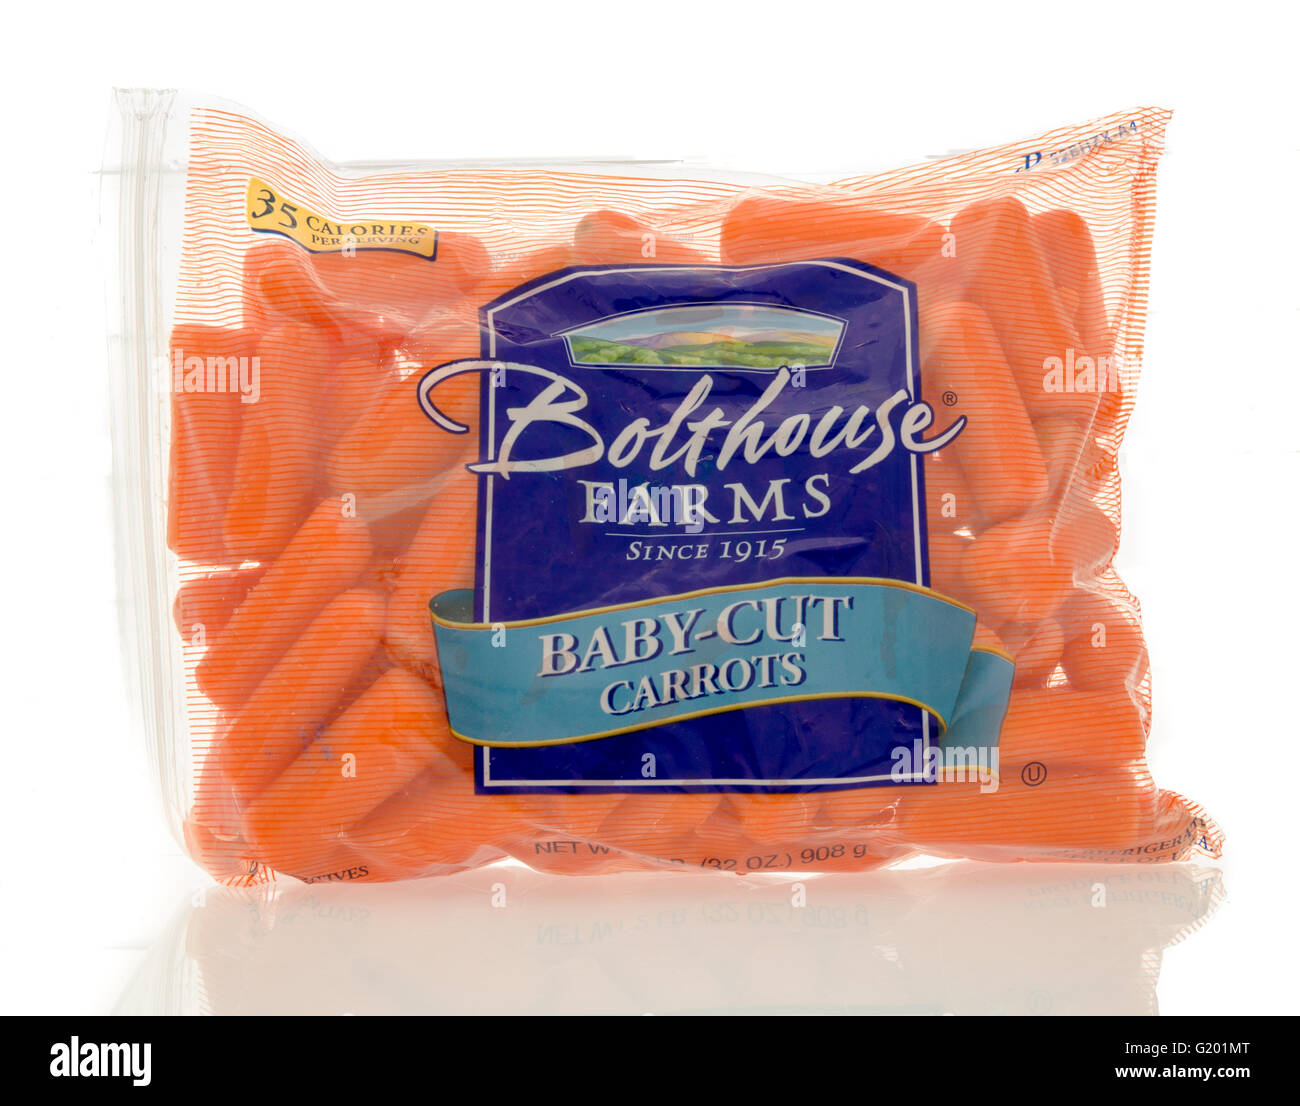 Winneconne, WI - 19 May 2016:  Package of Bolt house farms baby-cut carrots on an isolated background Stock Photo